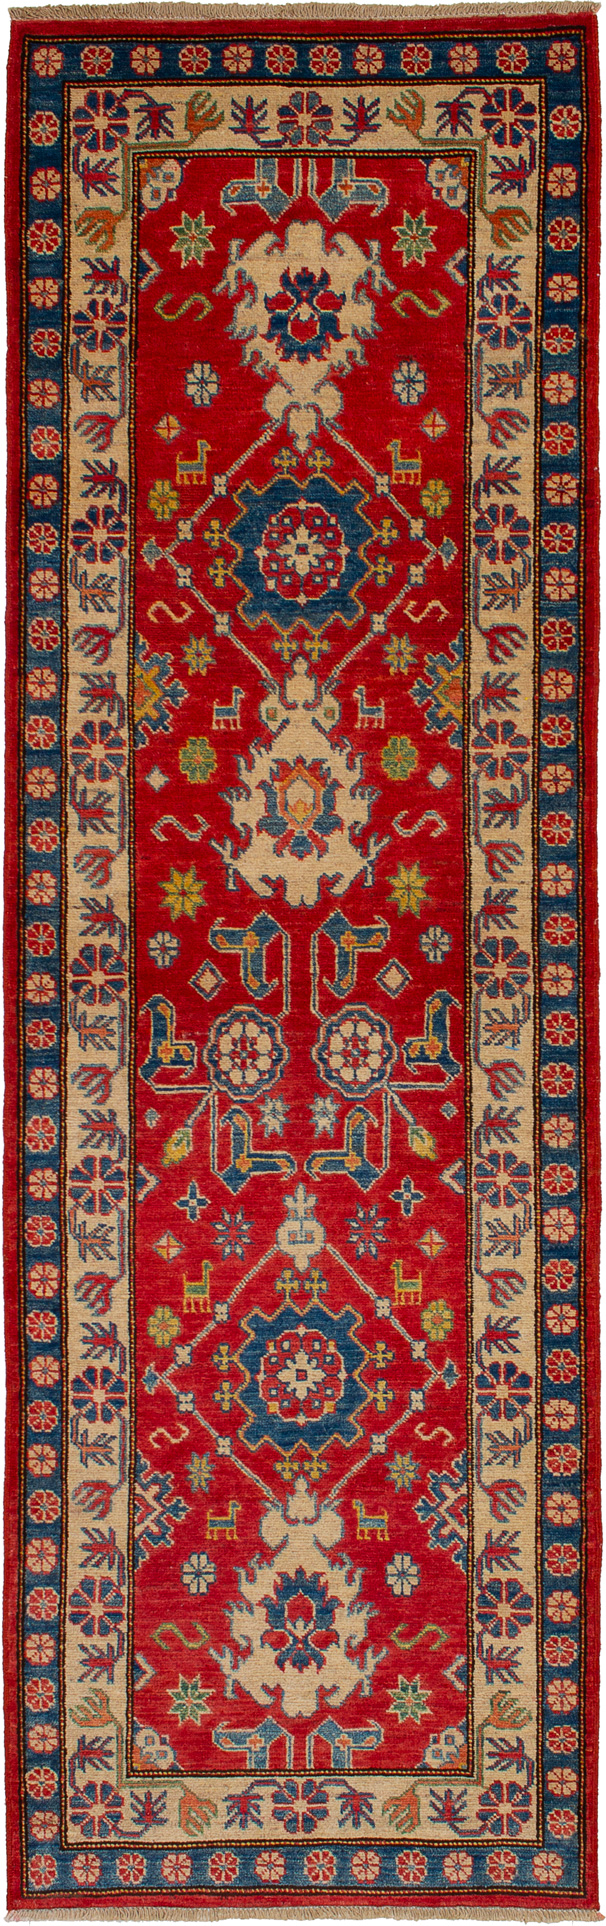 Hand-knotted Finest Gazni Red Wool Rug 2'8" x 8'11"  Size: 2'8" x 8'11"  